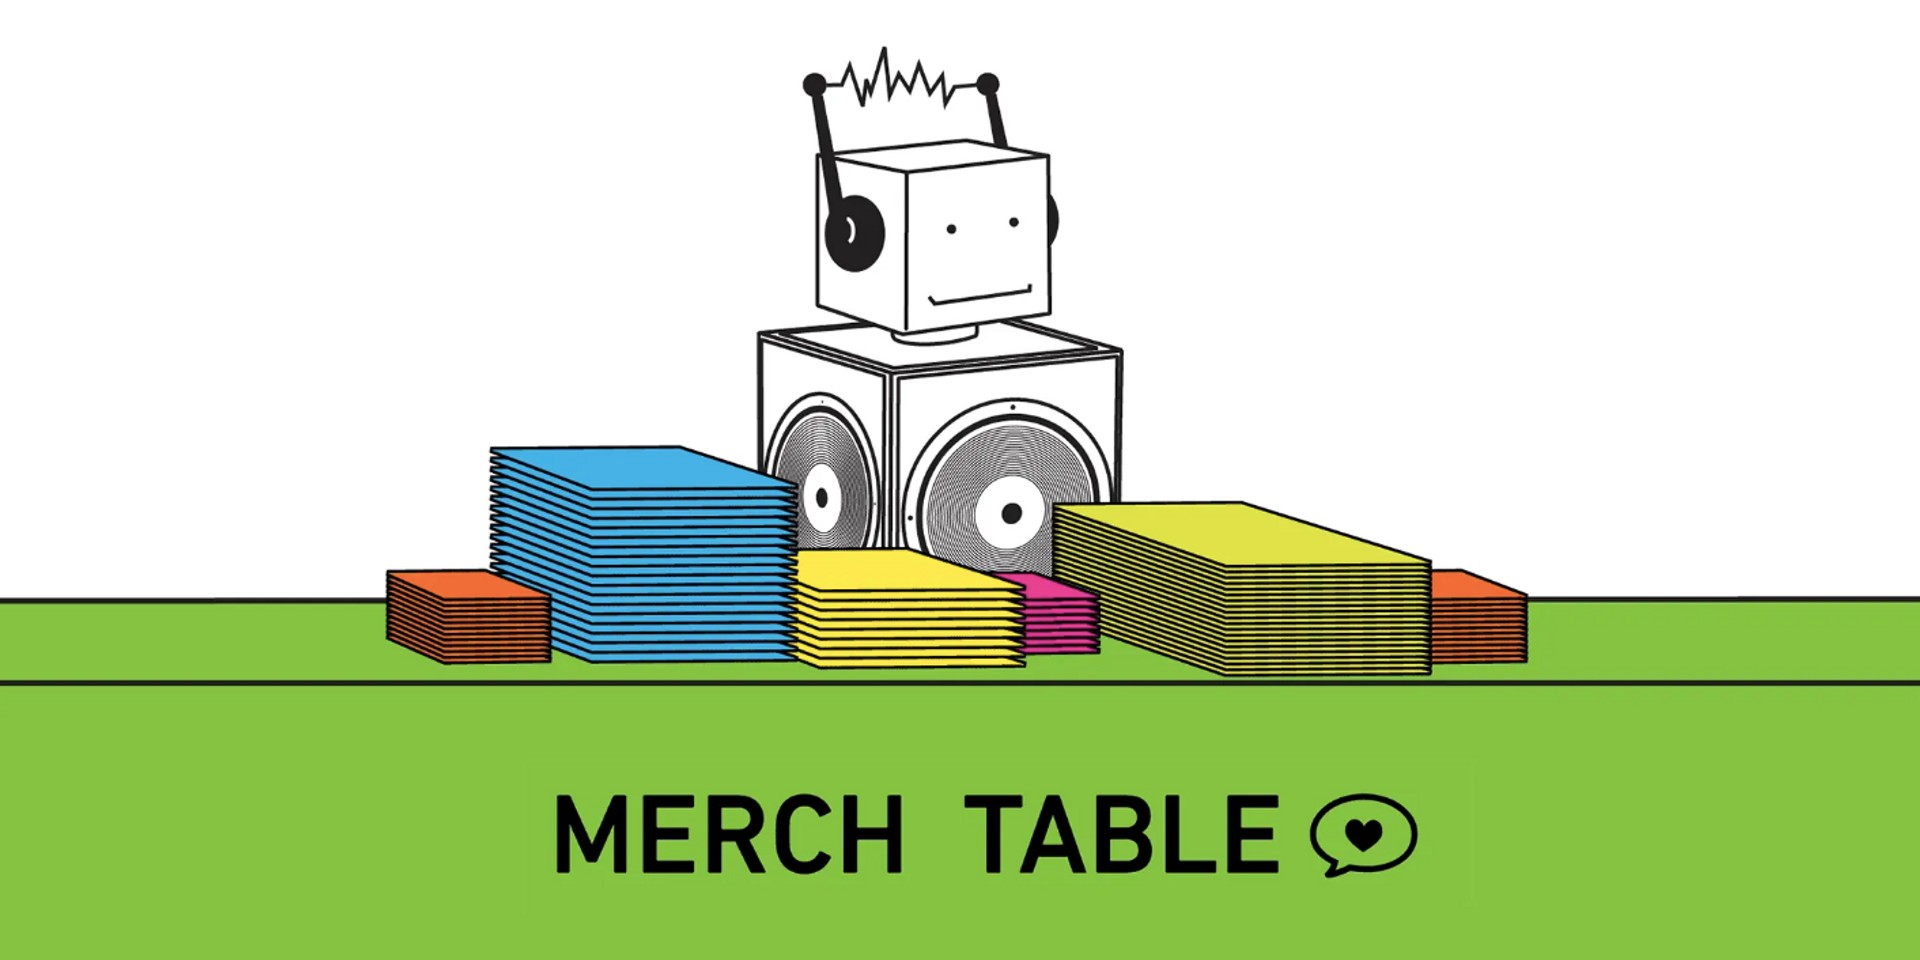 Support your favourite artists with Hype Machine’s Merch Table, which generates Bandcamp links from your Spotify playlists